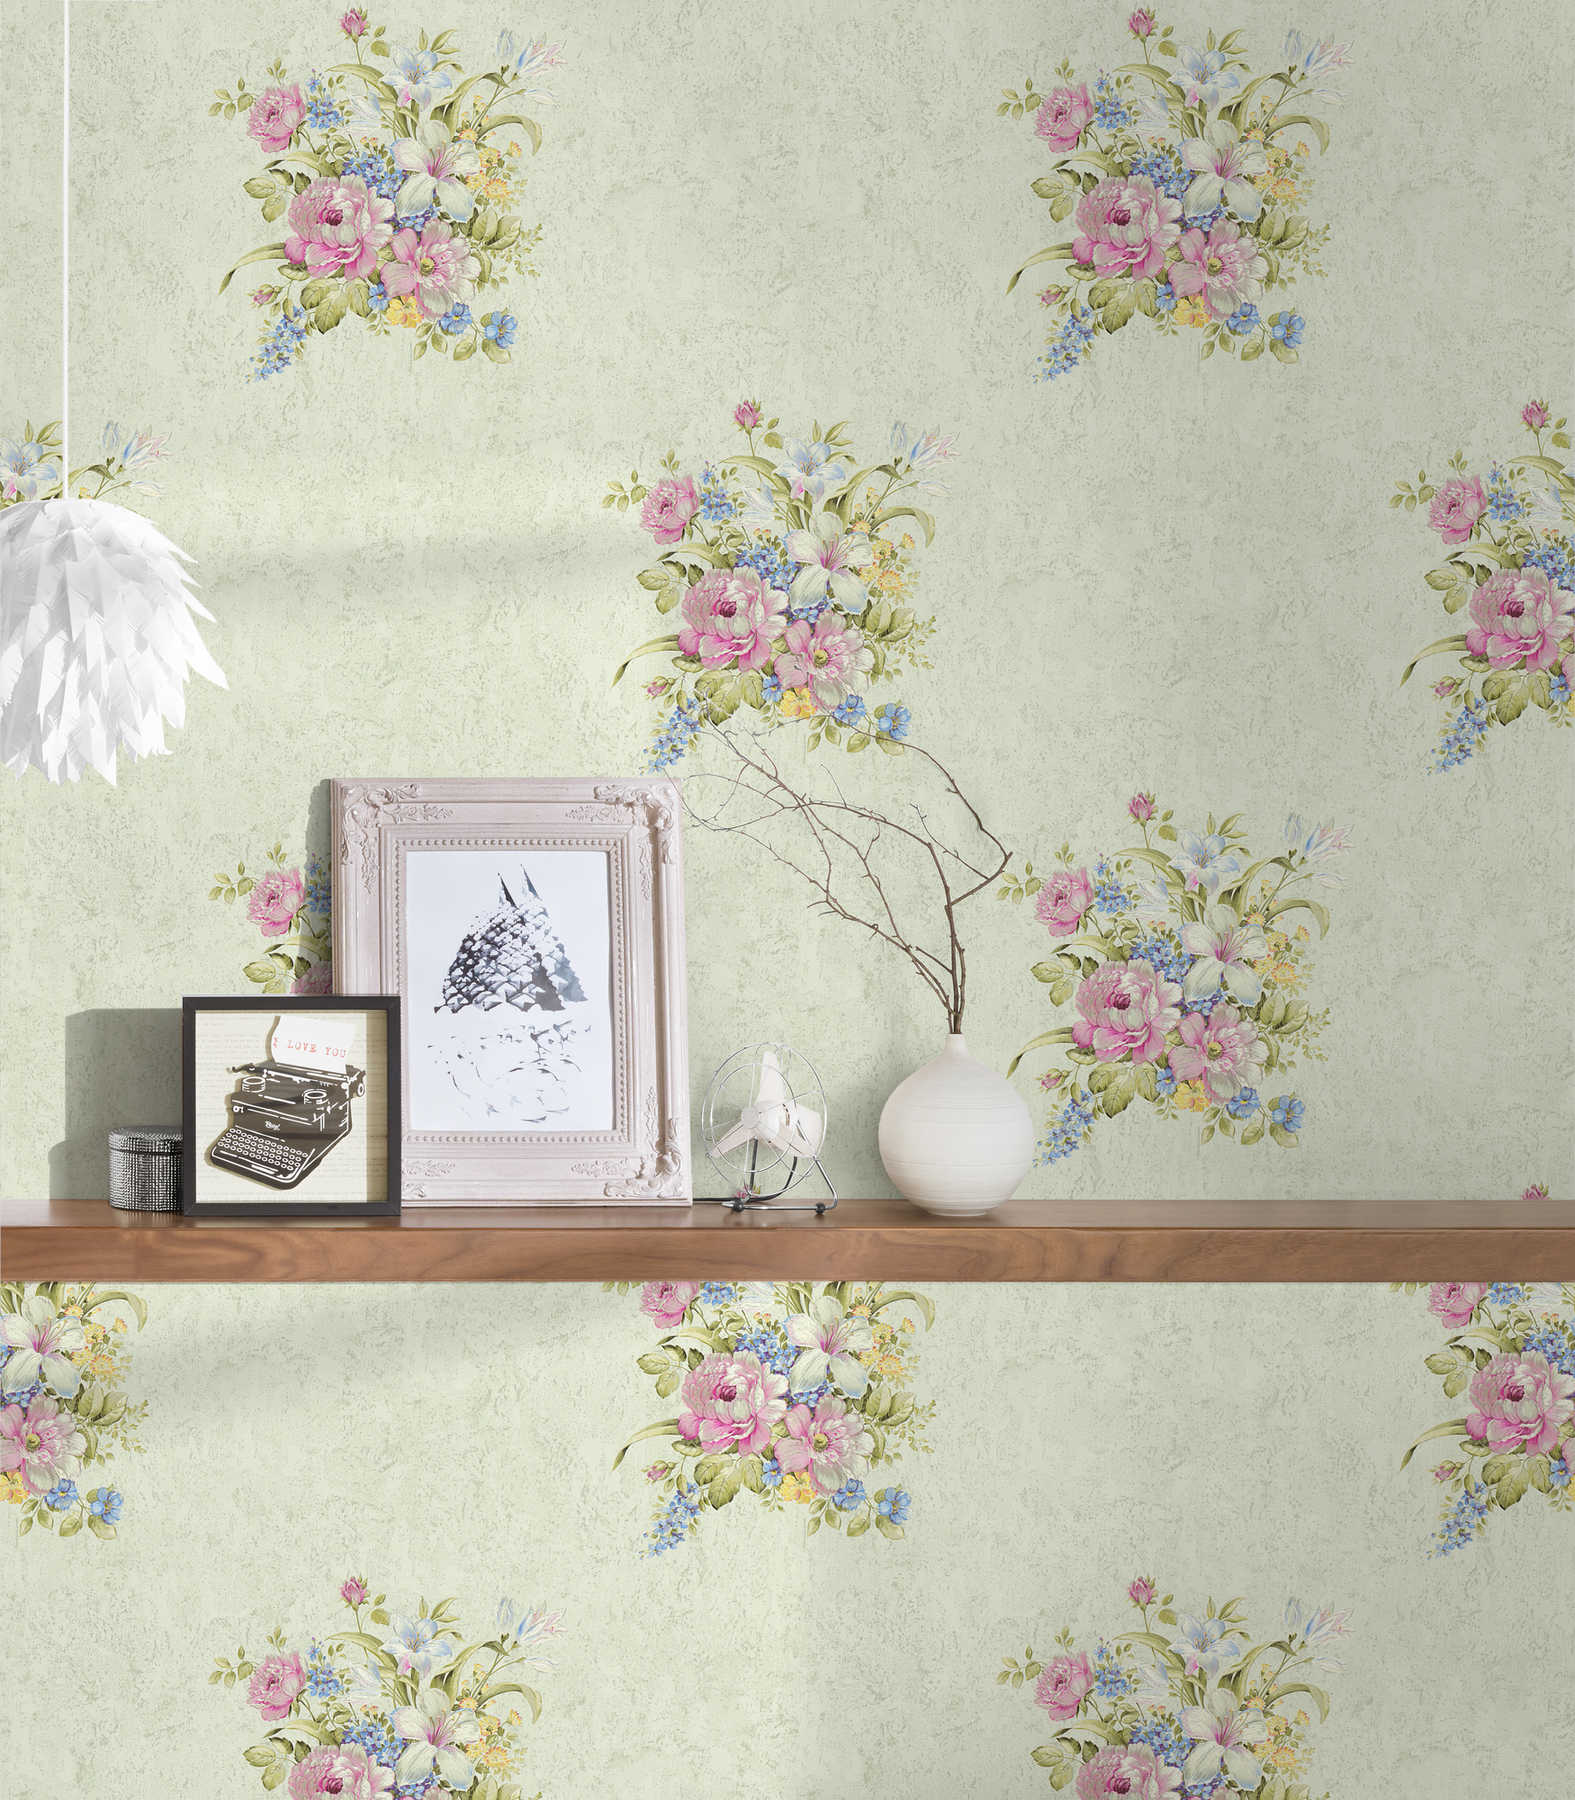             Flowers wallpaper with ornaments, textured - green, pink
        